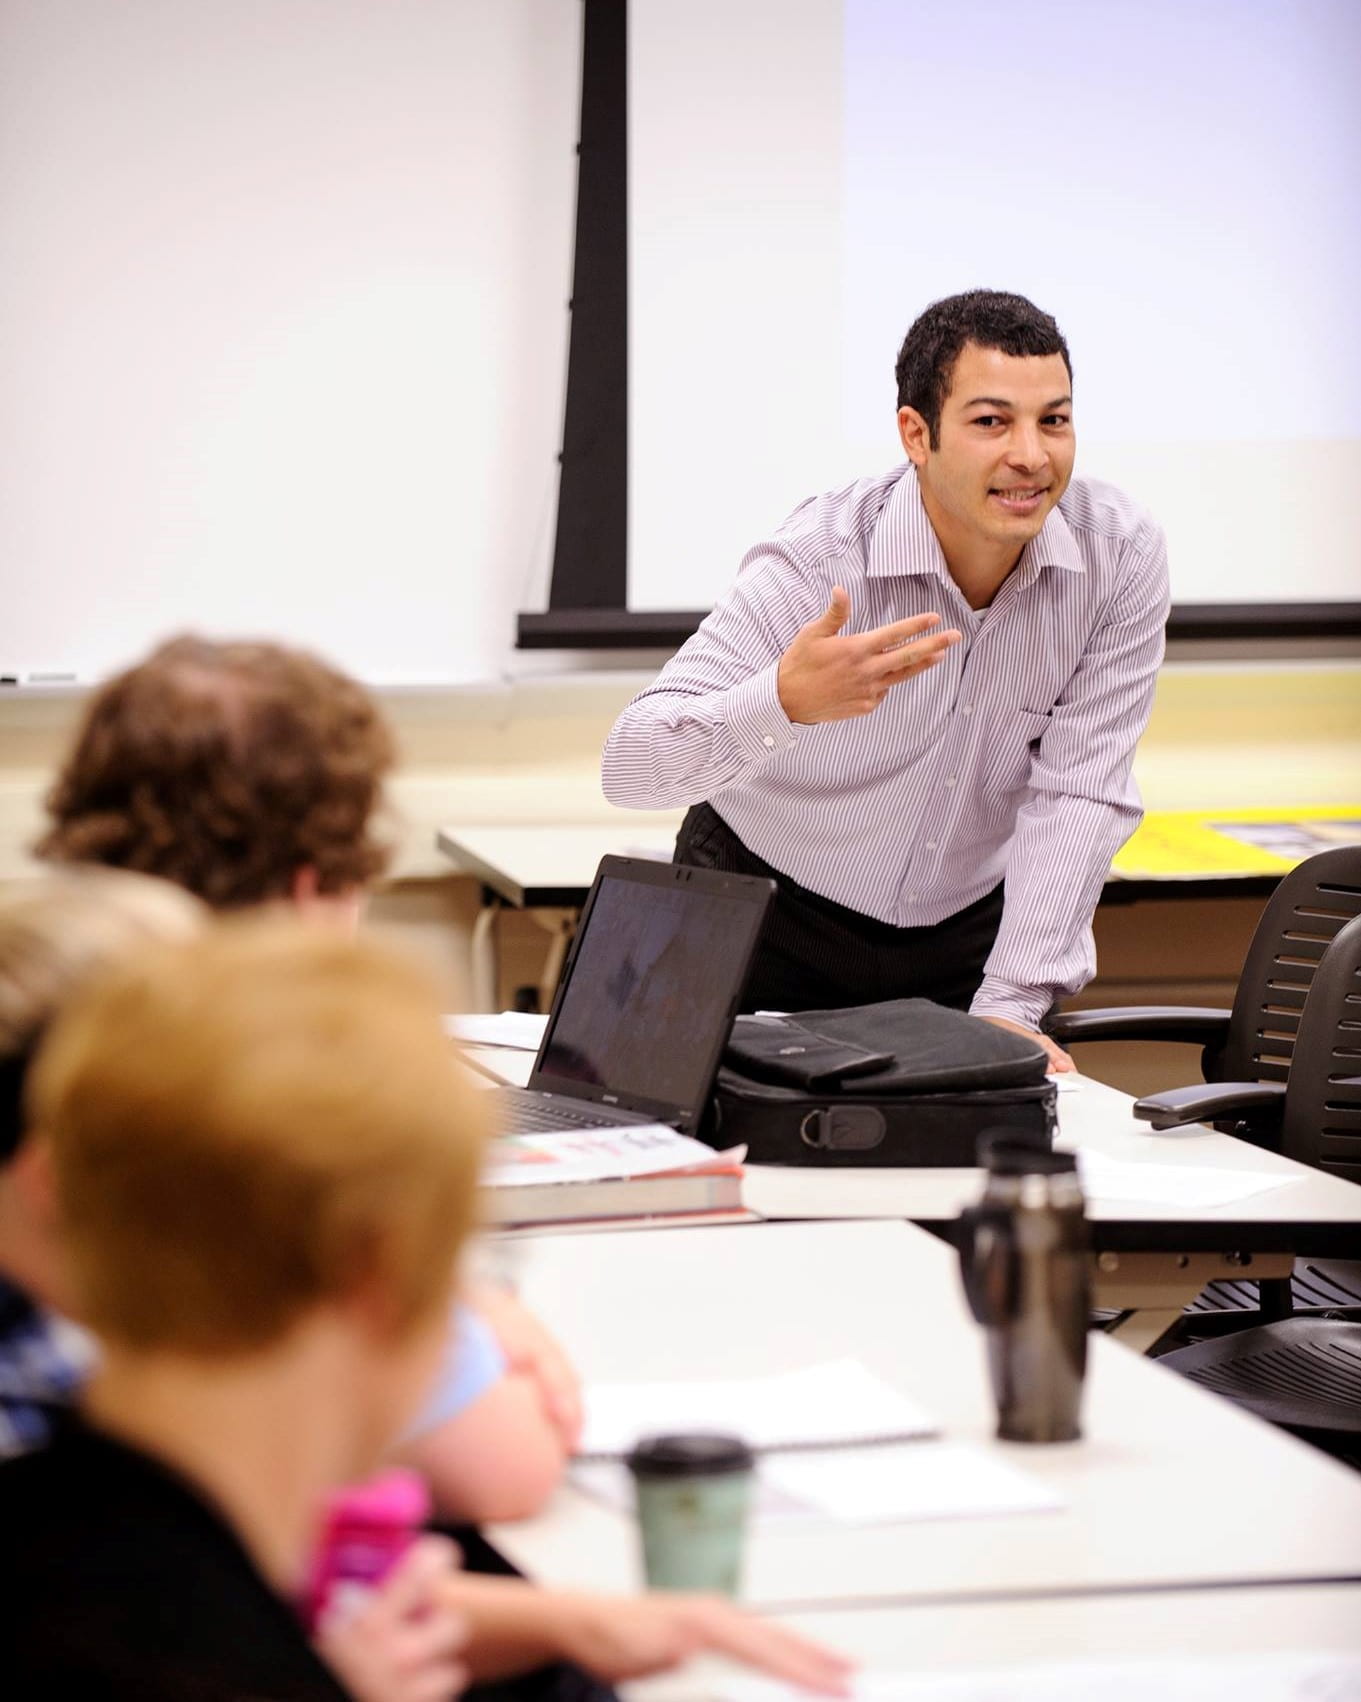 This photo shows Assistant Professor Adil Bentahar standing at the front of the classroom and gesturing to three students.